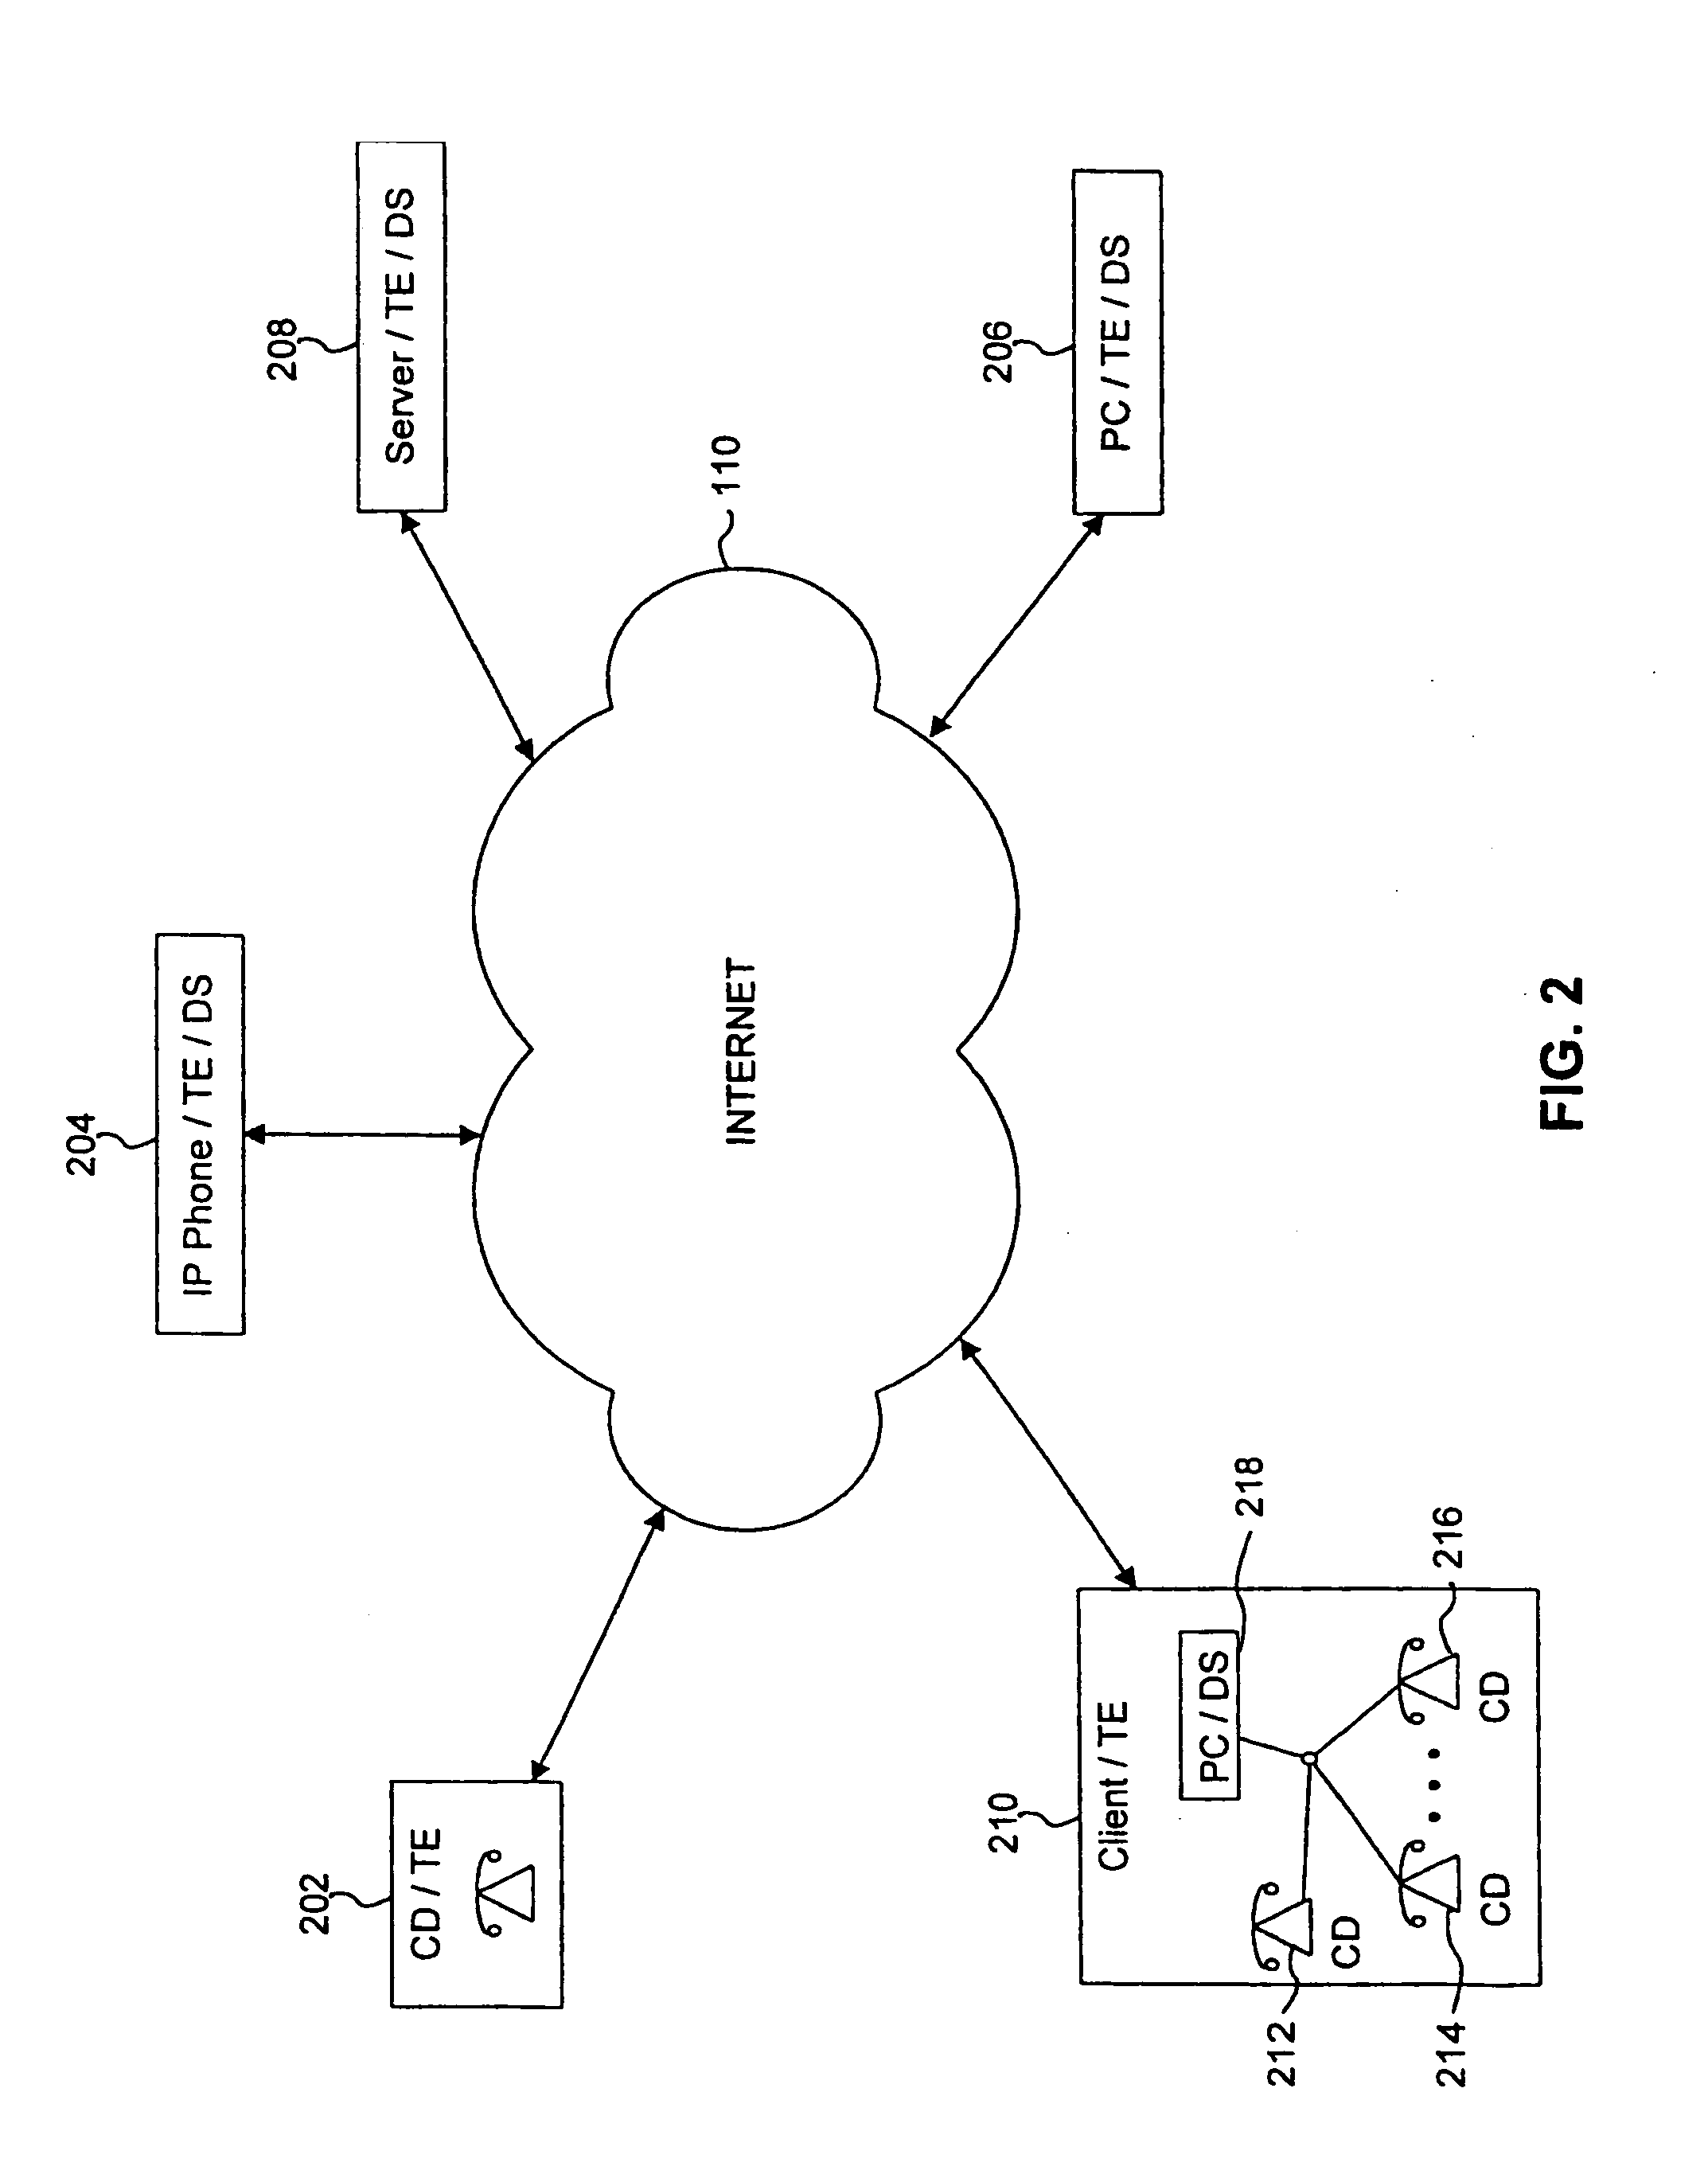 System and method for diagnostic supervision of internet transmissions with quality of service control